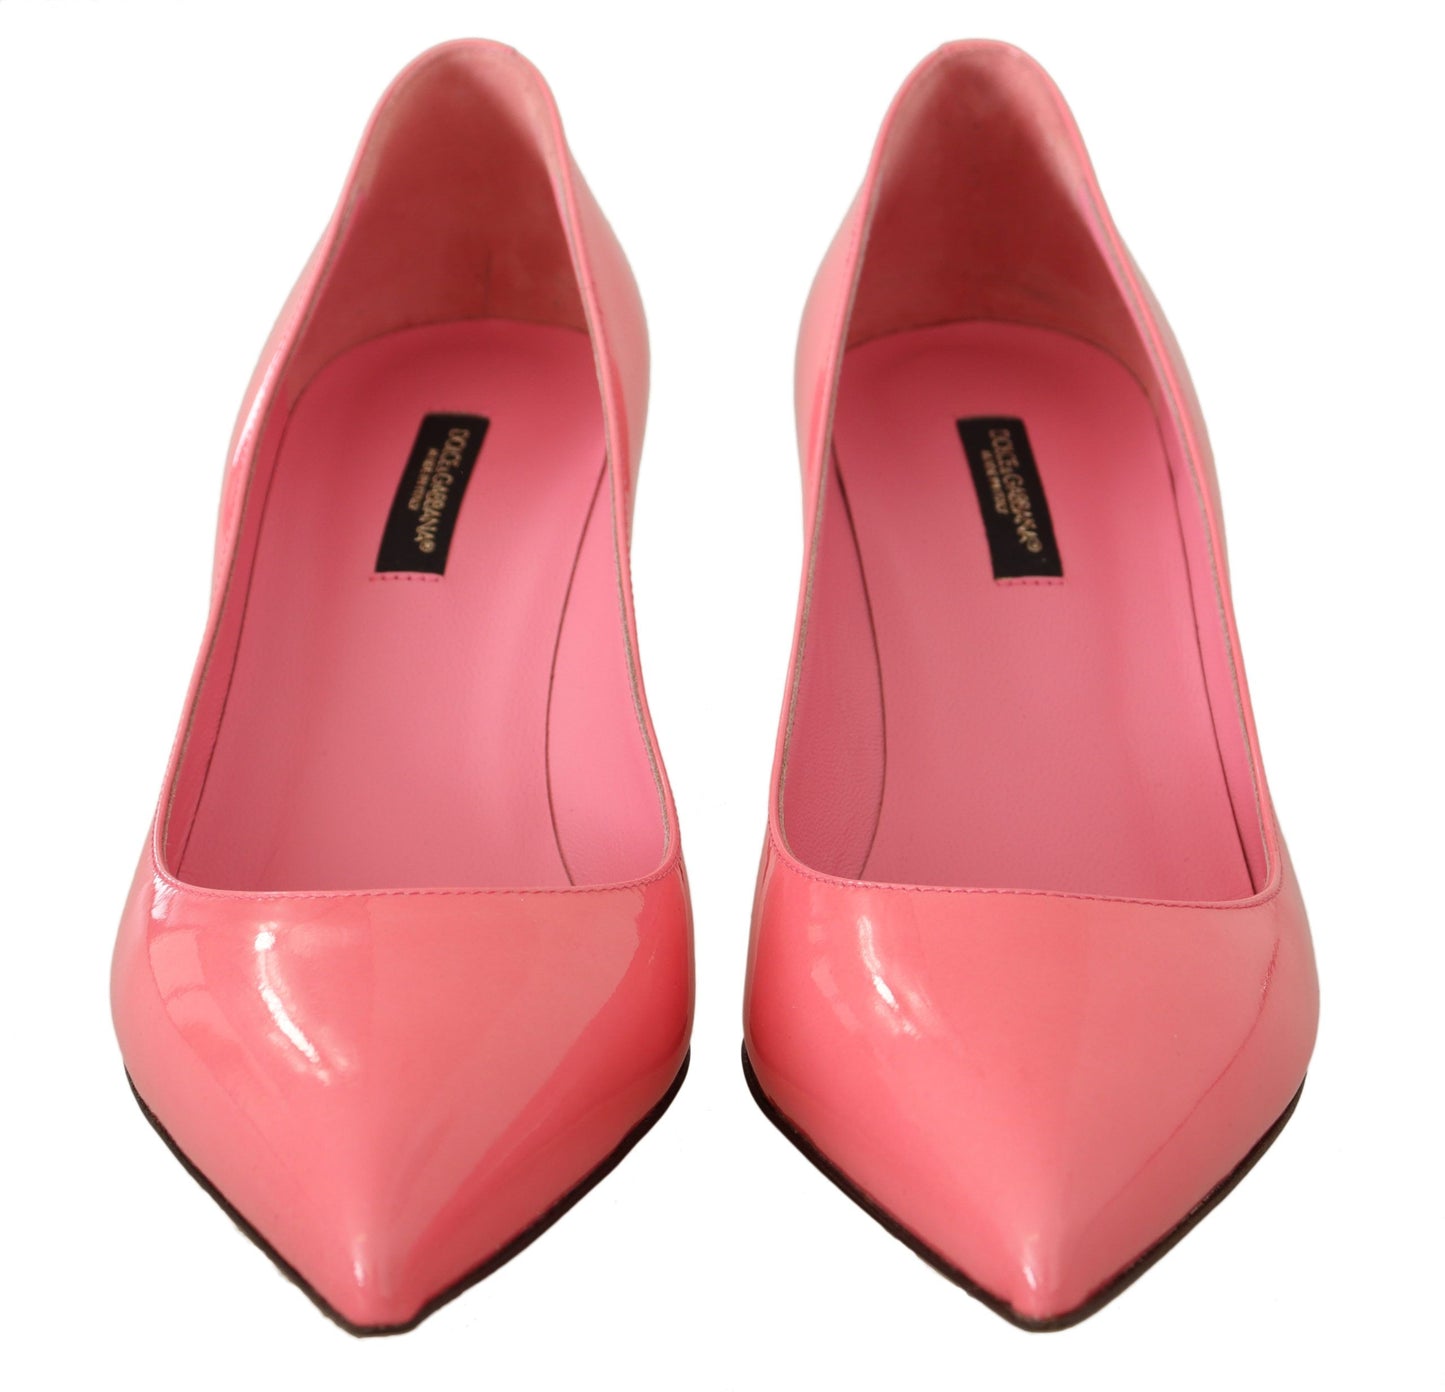 Chic Patent Leather Pink Pumps